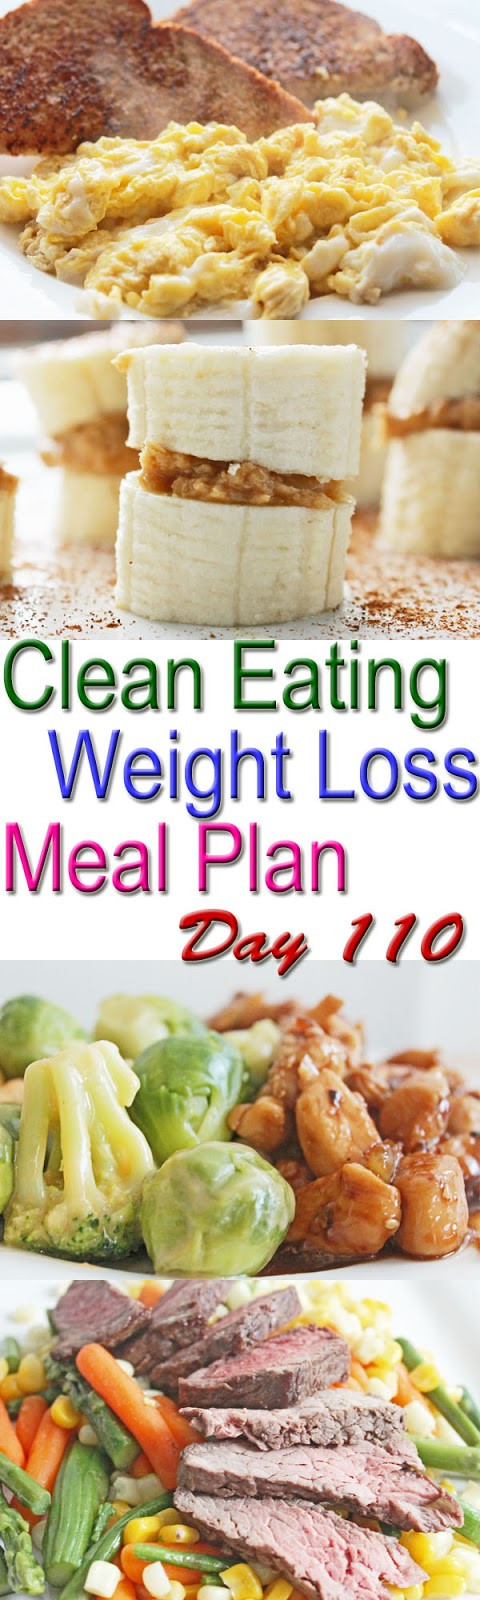 Clean Eating Foods For Weight Loss
 Clean Eating Weight Loss Meal Plan 110